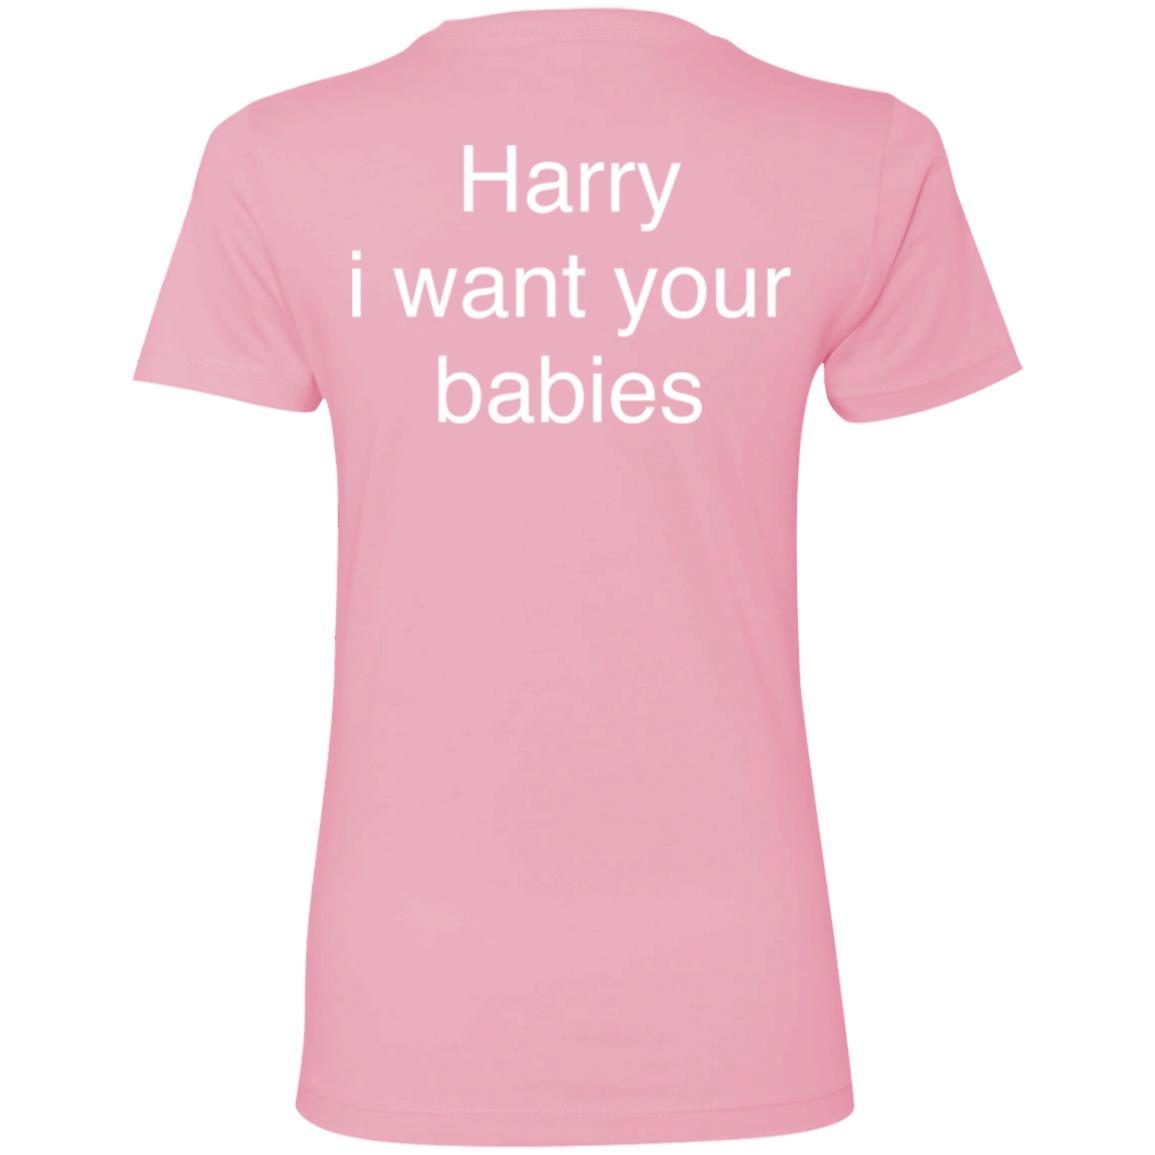 Harry I Want Your Babies shirt 3